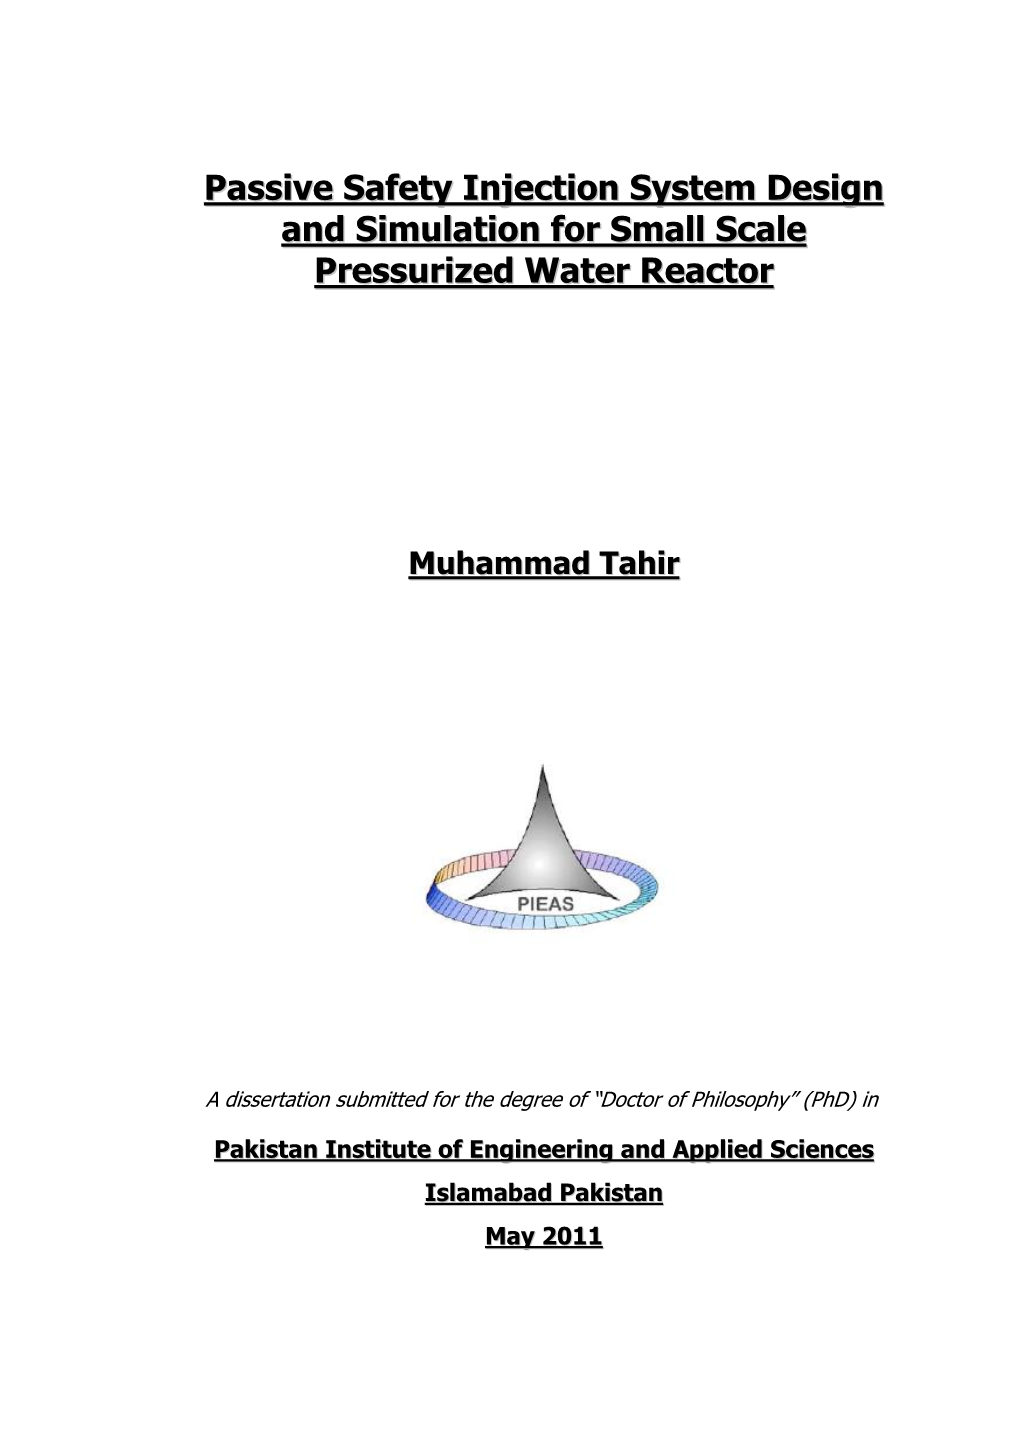 Passive Safety Injection System Design and Simulation for Small Scale Pressurized Water Reactor